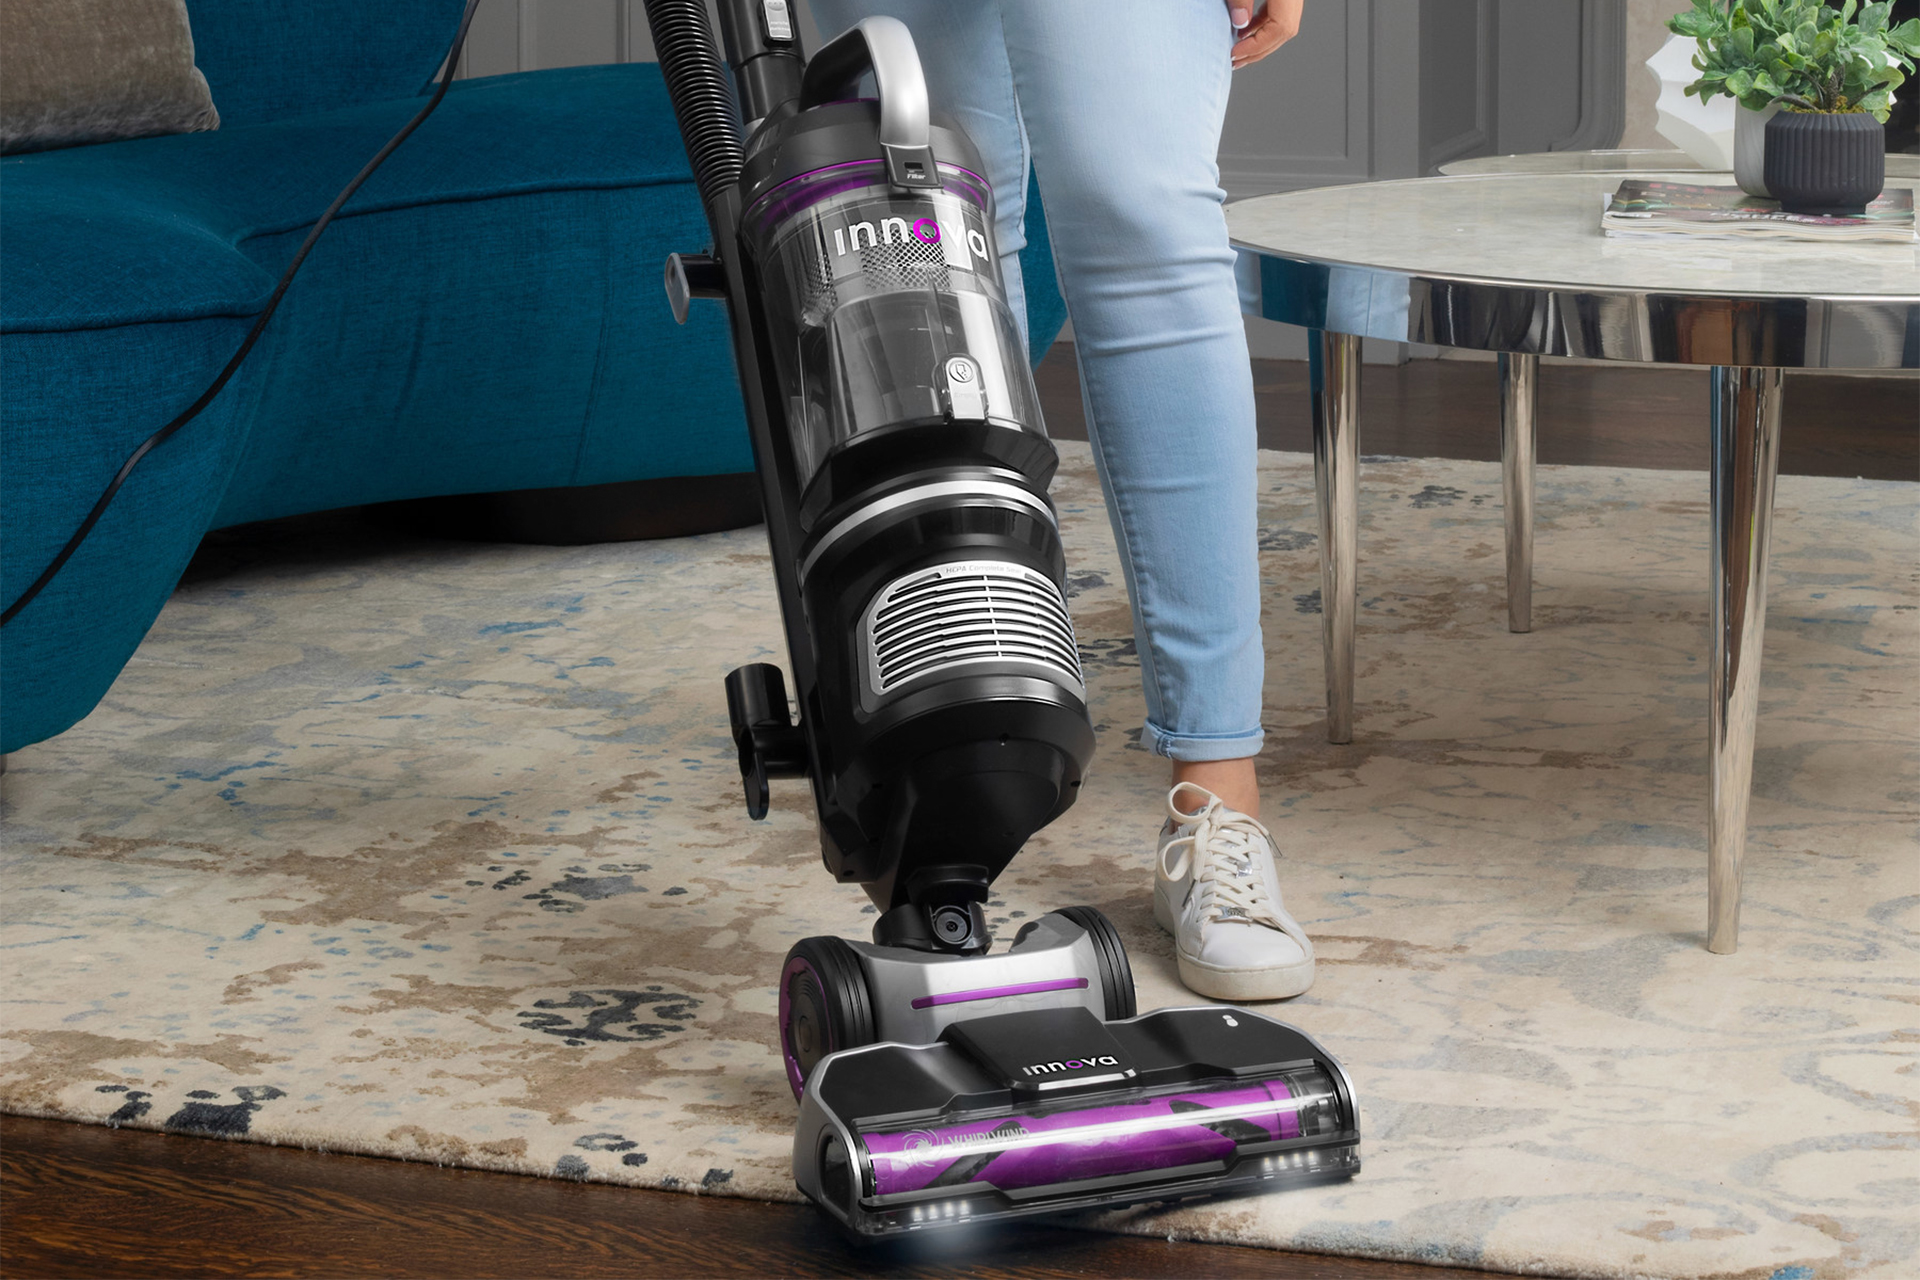 How to care for Innova Vacuum Cleaner?